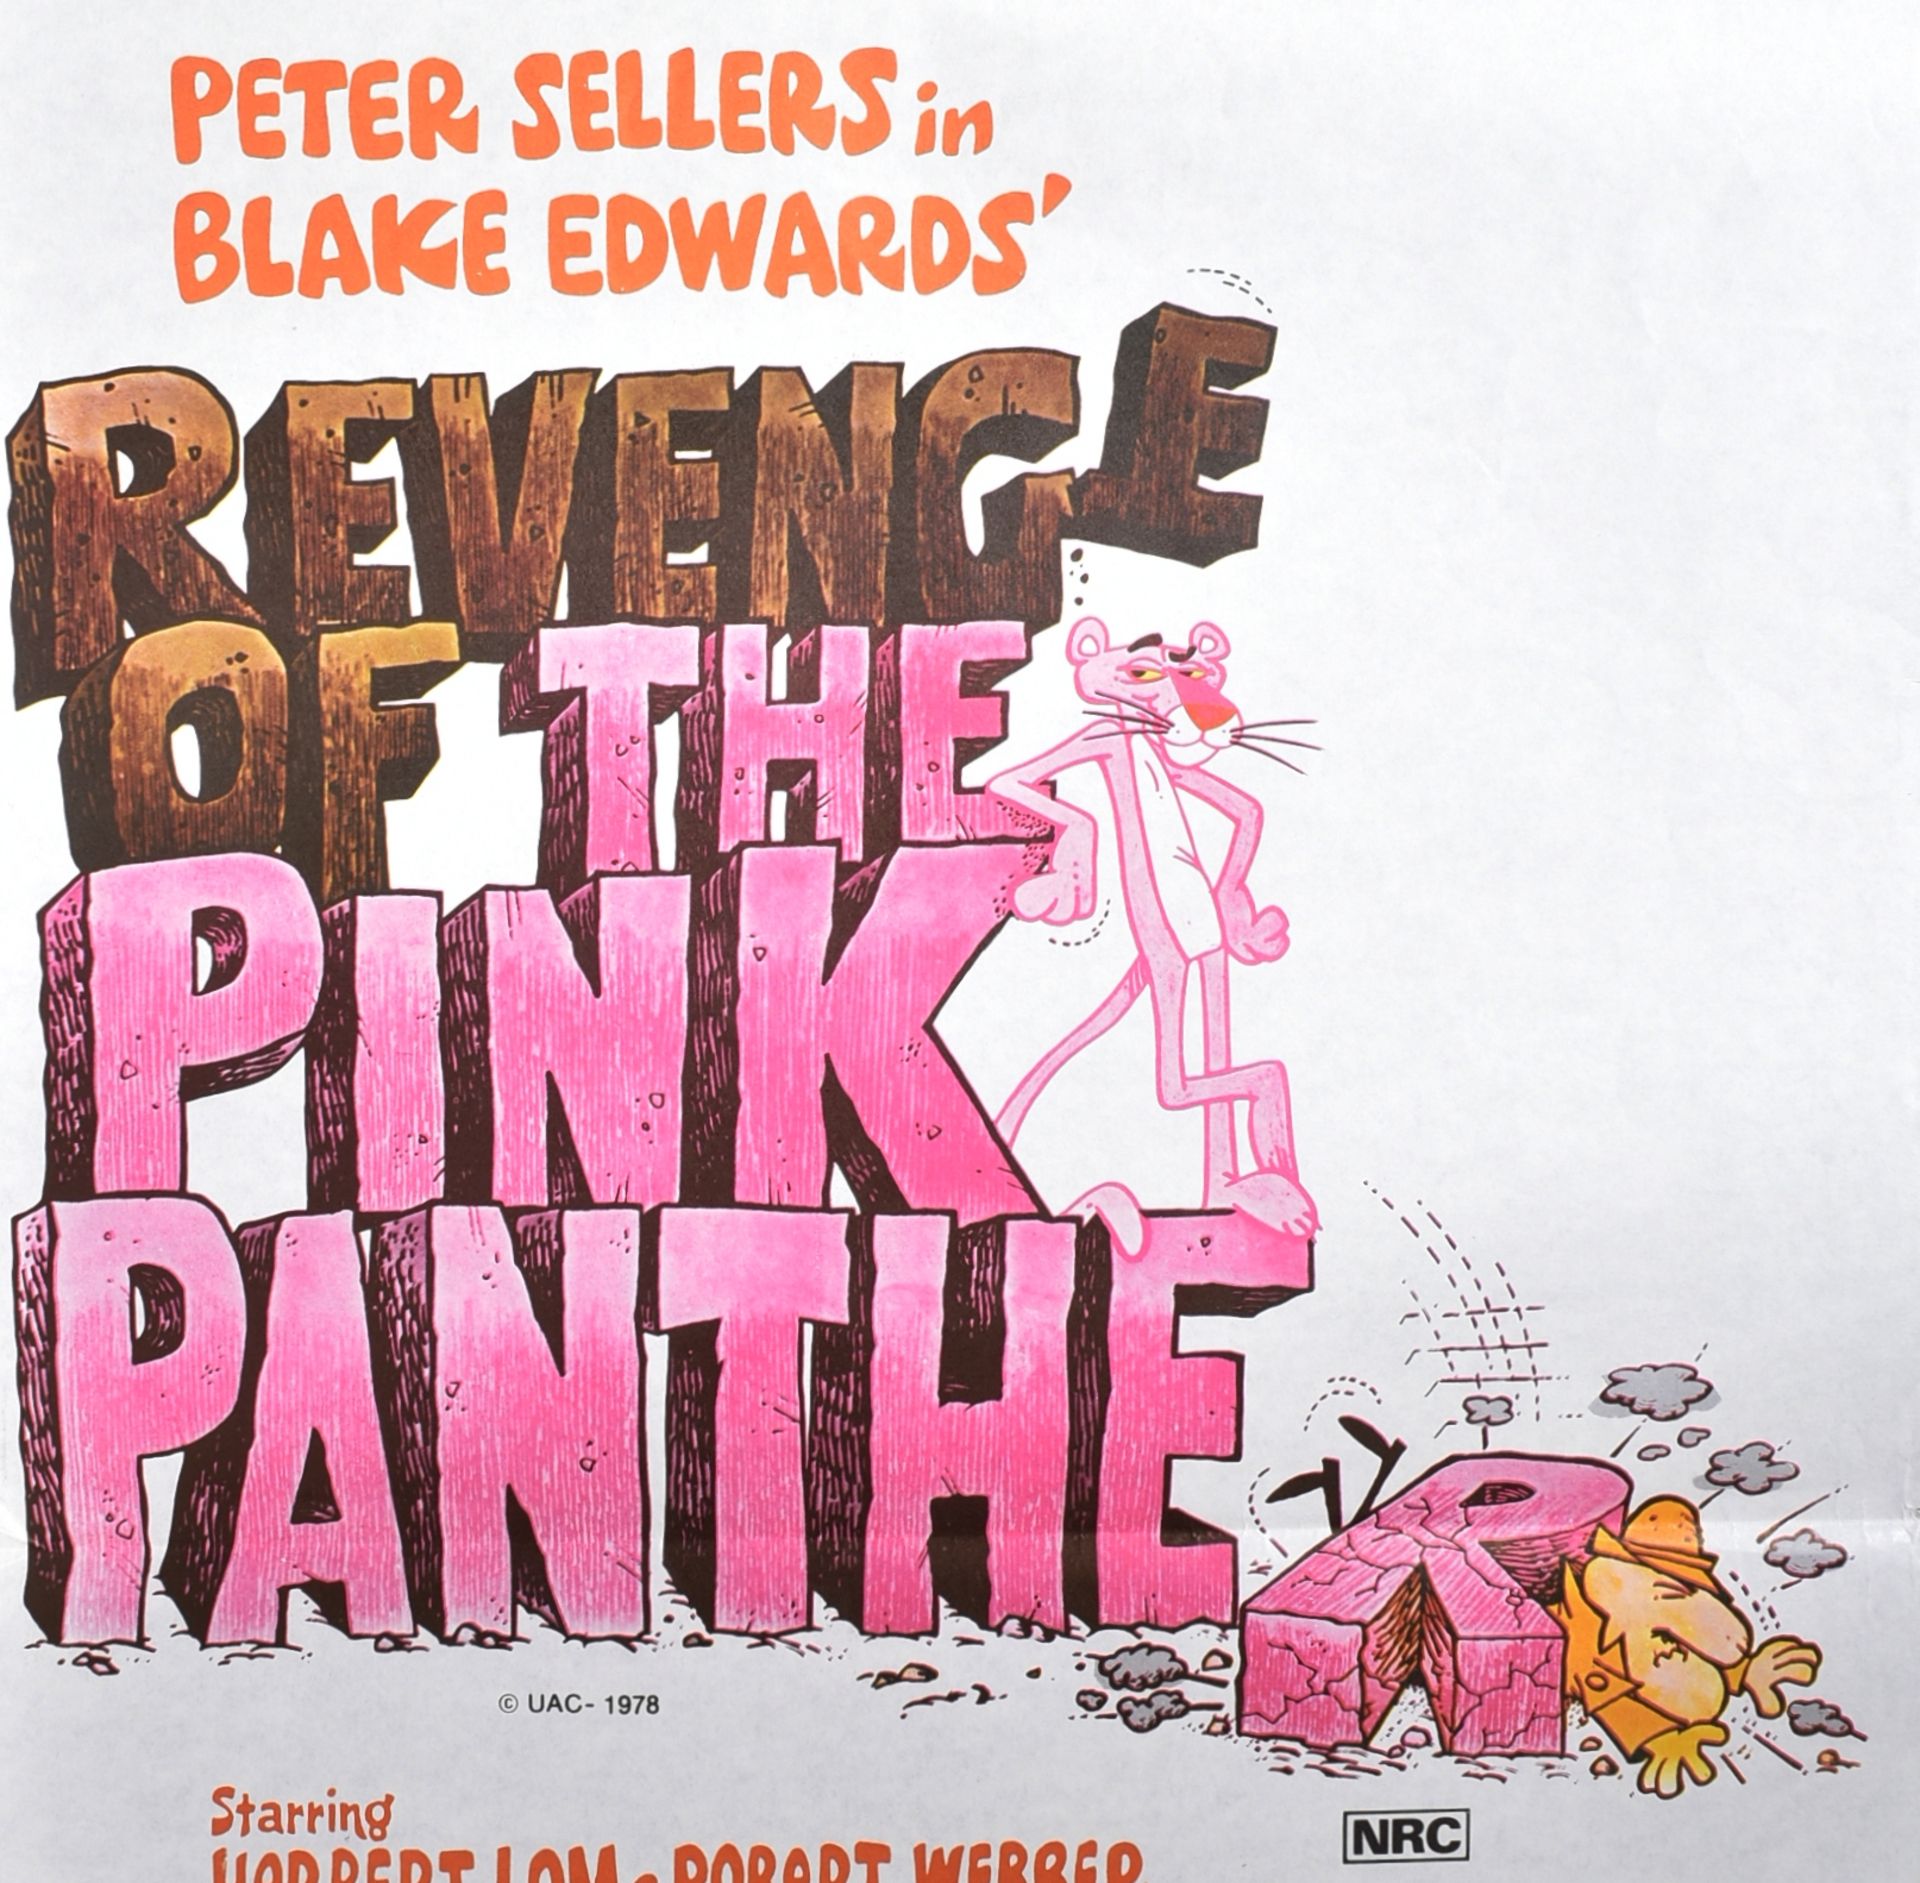 REVENGE OF THE PINK PANTHER (1978) - ORIGINAL SIGNED DAYBILL POSTER - Image 3 of 5